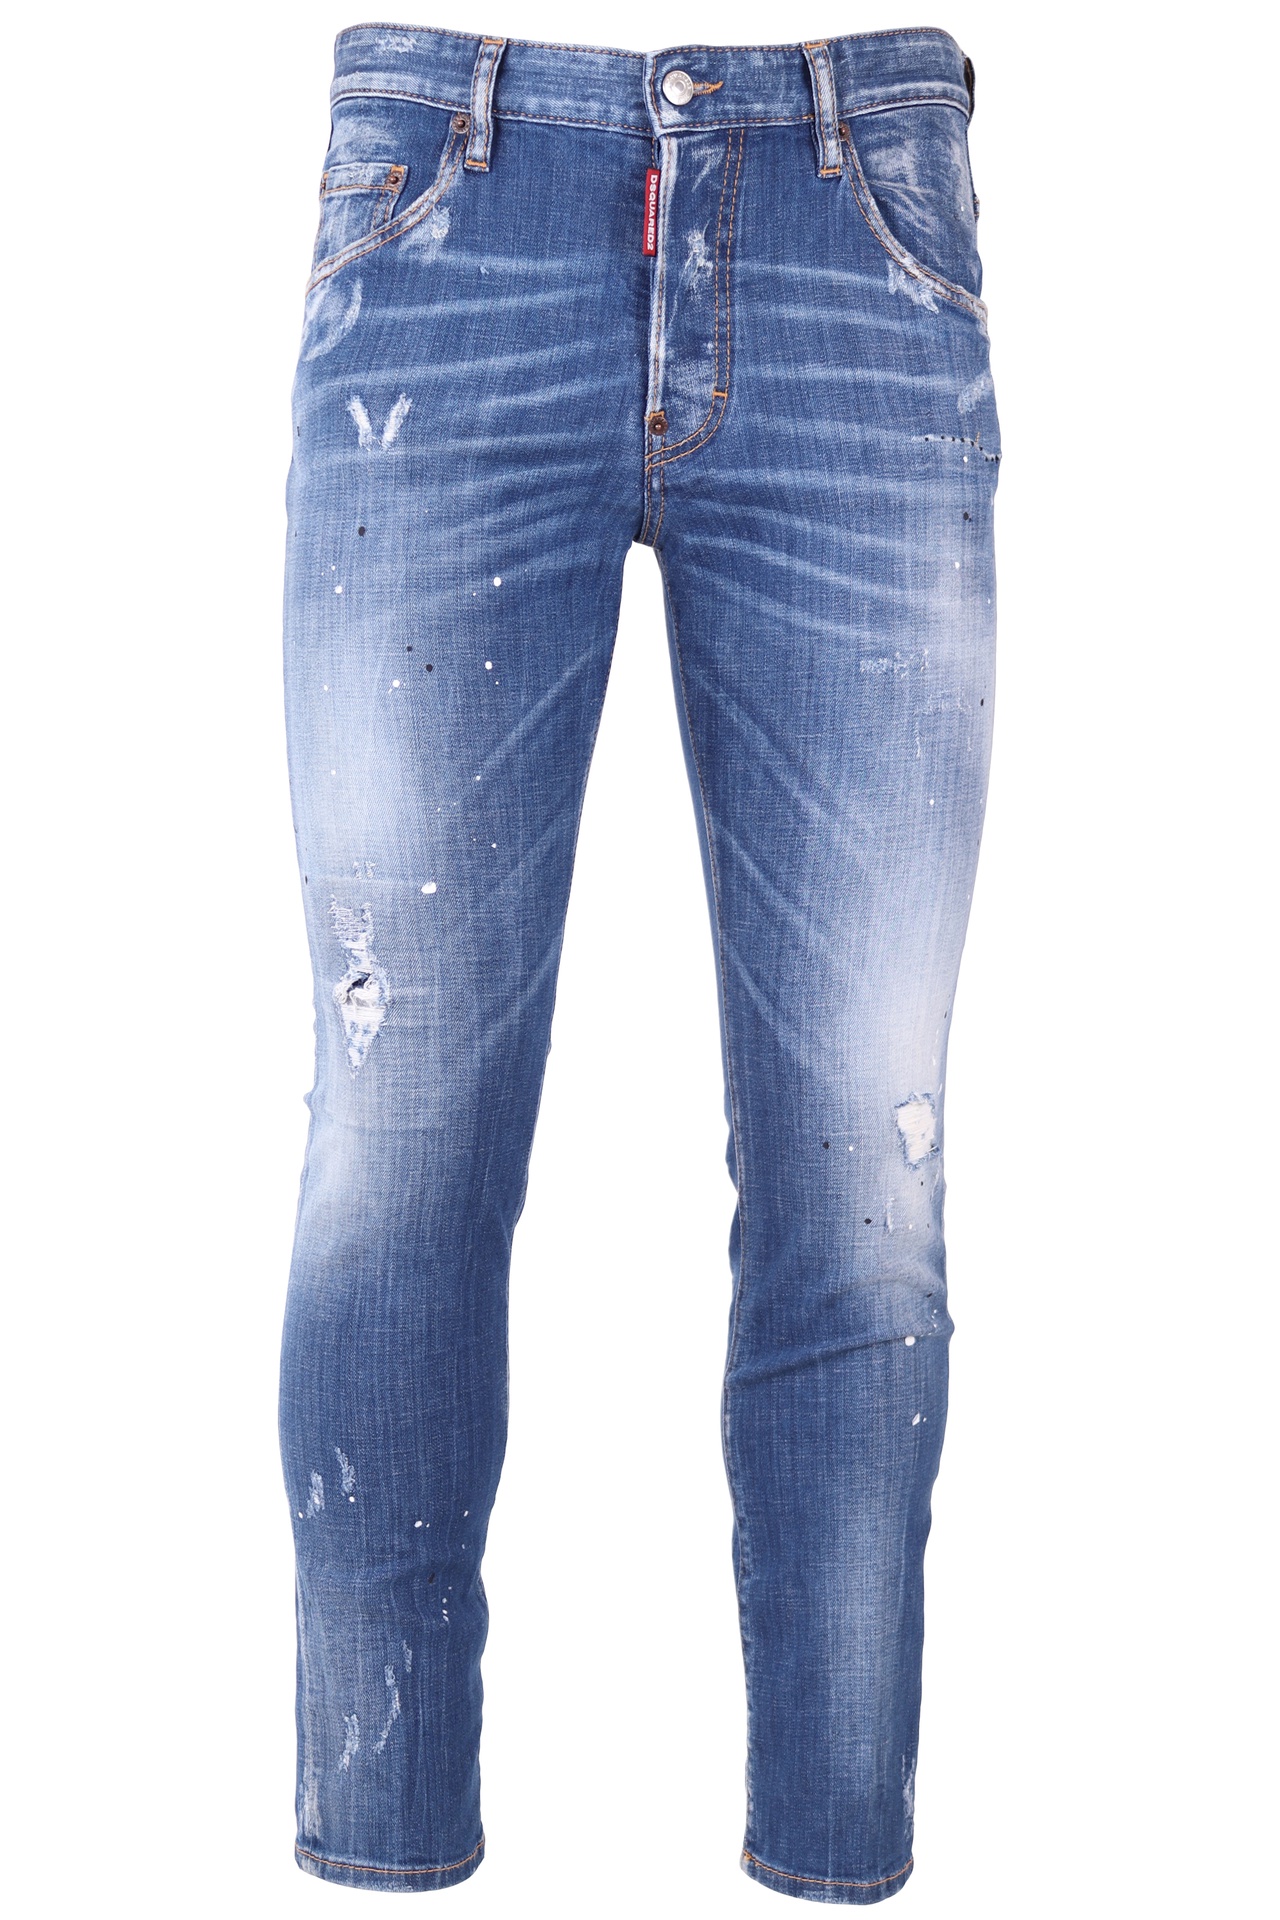 jean dsquared2 blue painted